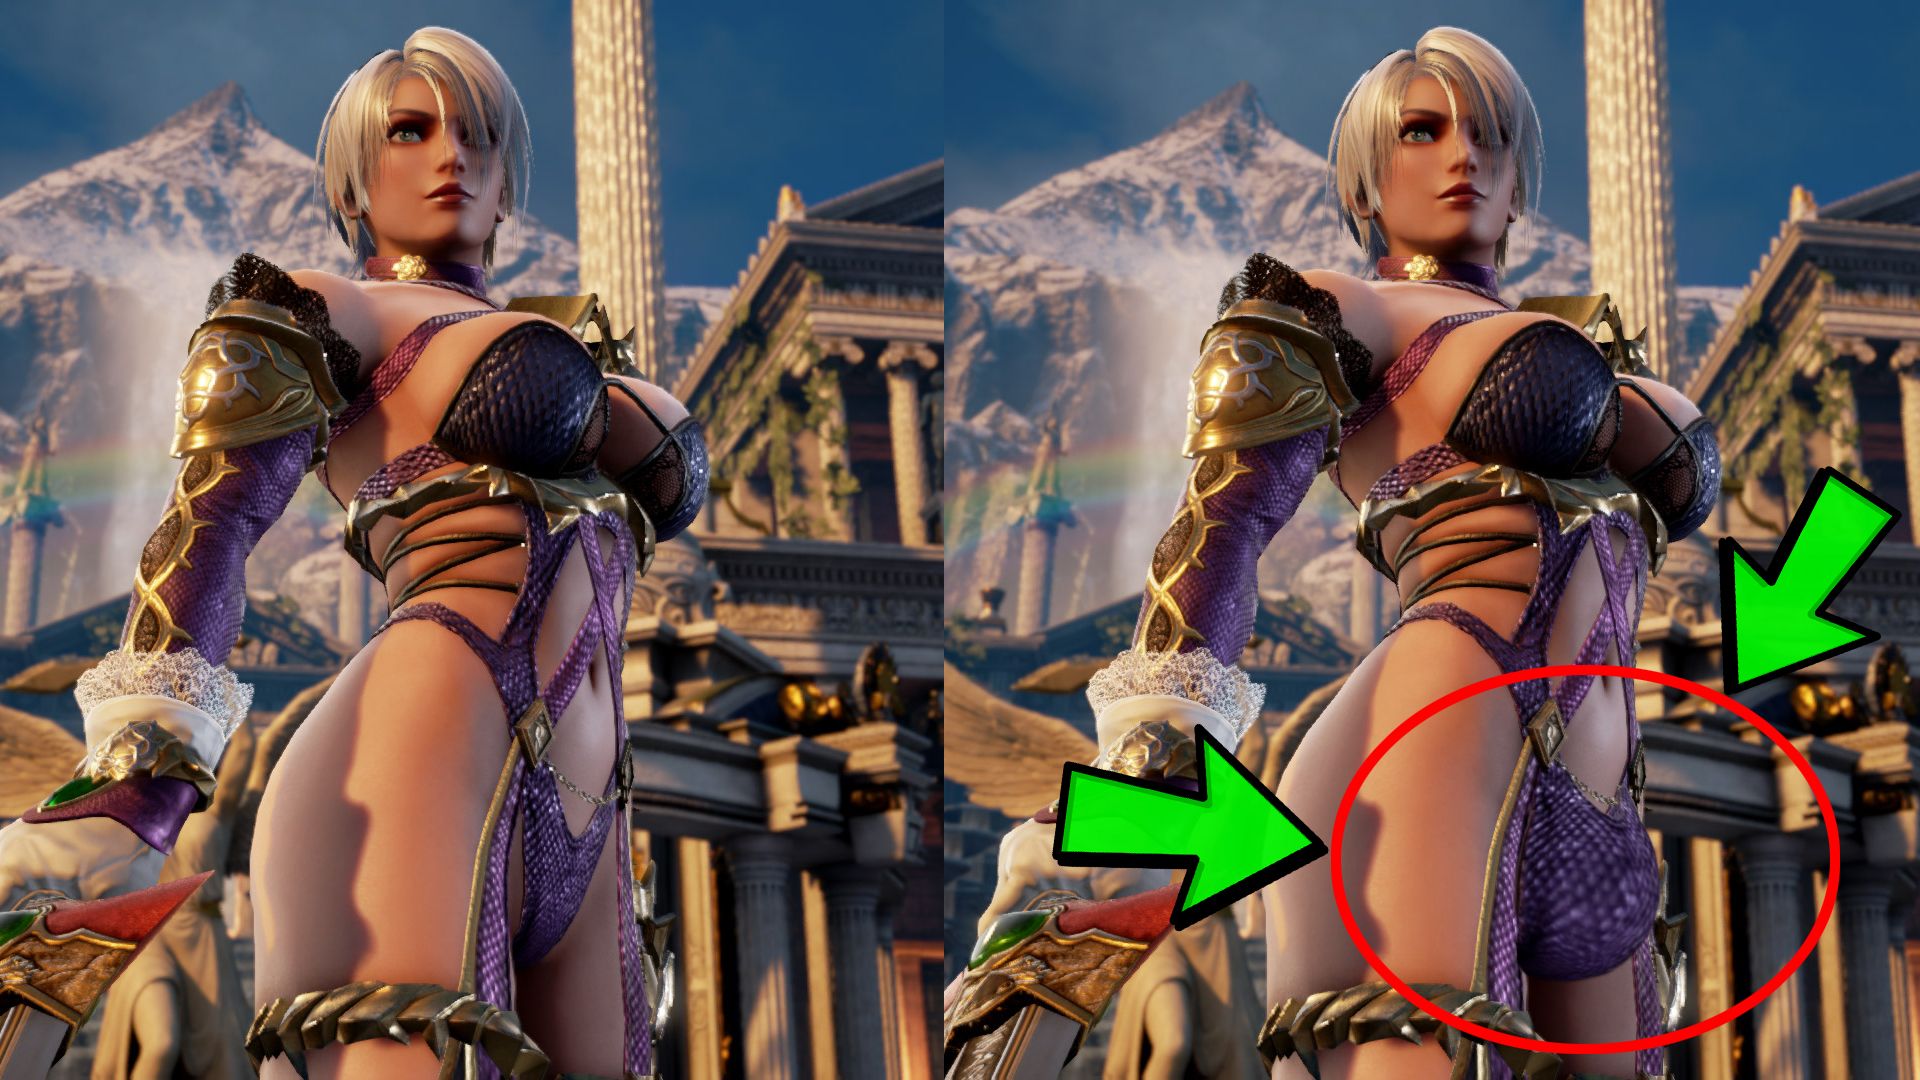 "Ivy Is Now A Male" Bandai Namco's Decision After SoulCalibur E3 Backlash Stirs More Controversy